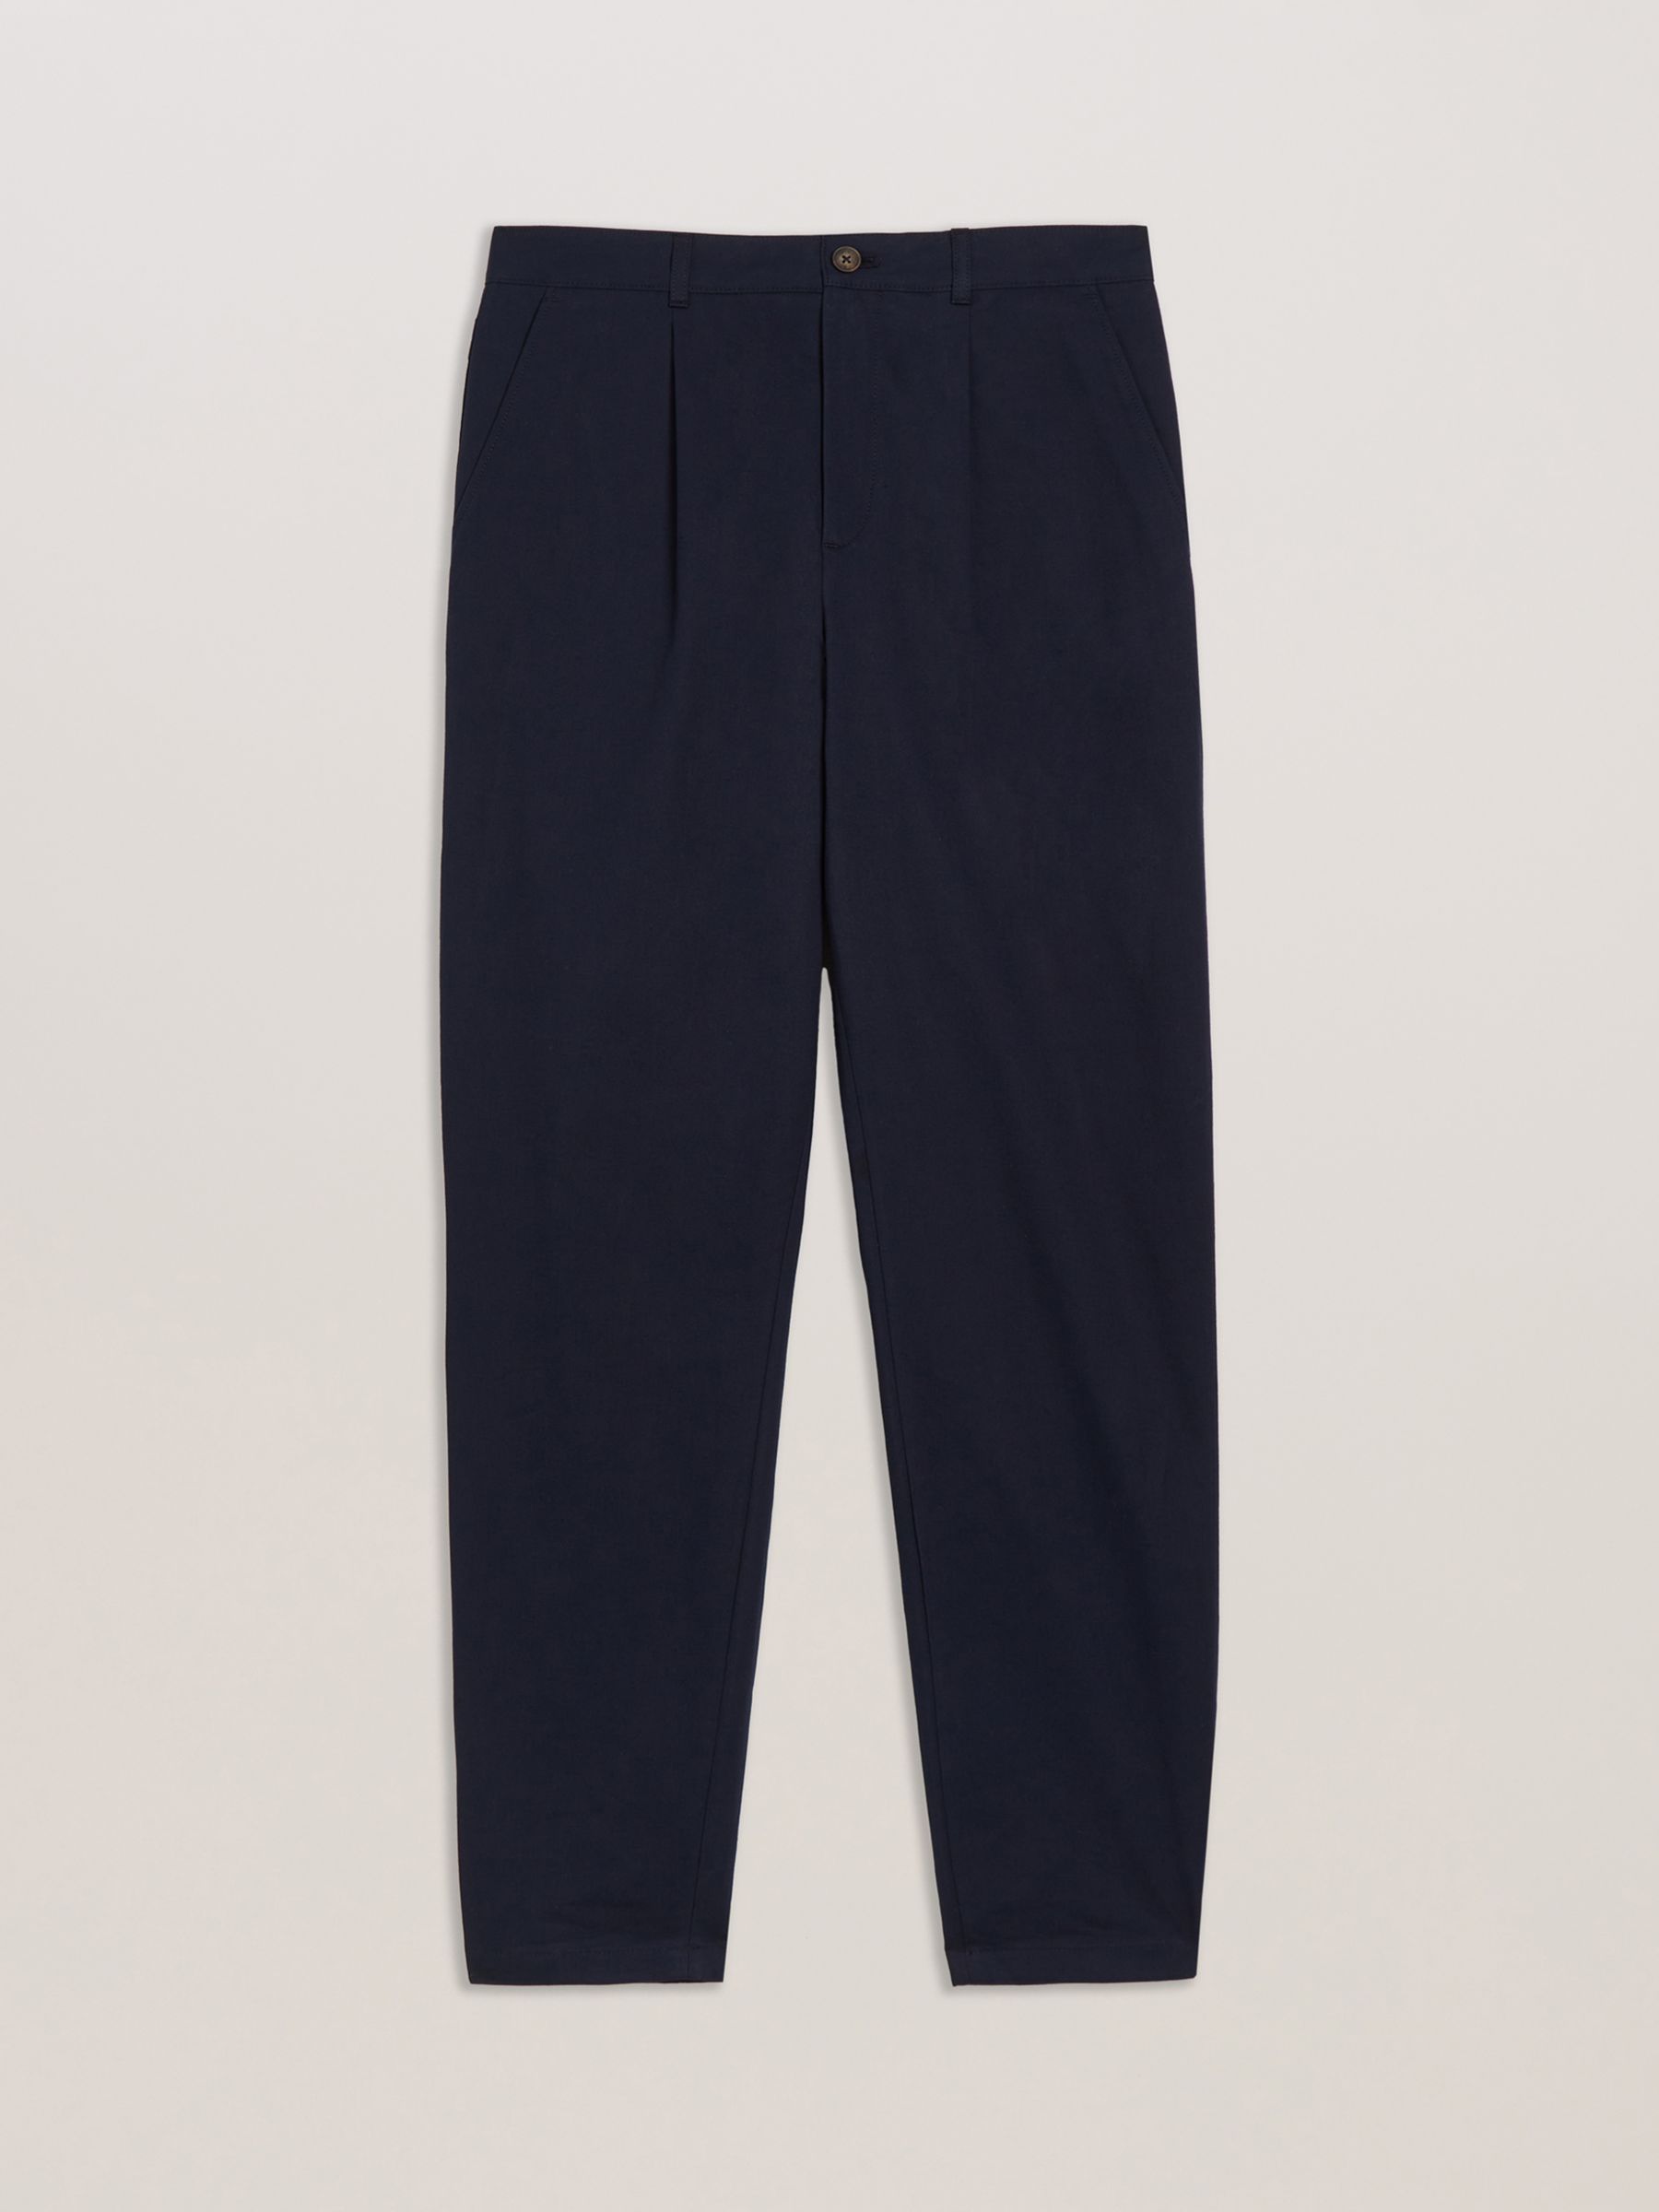 Buy Ted Baker Holmer Linen Blend Chino Trousers, Navy Online at johnlewis.com